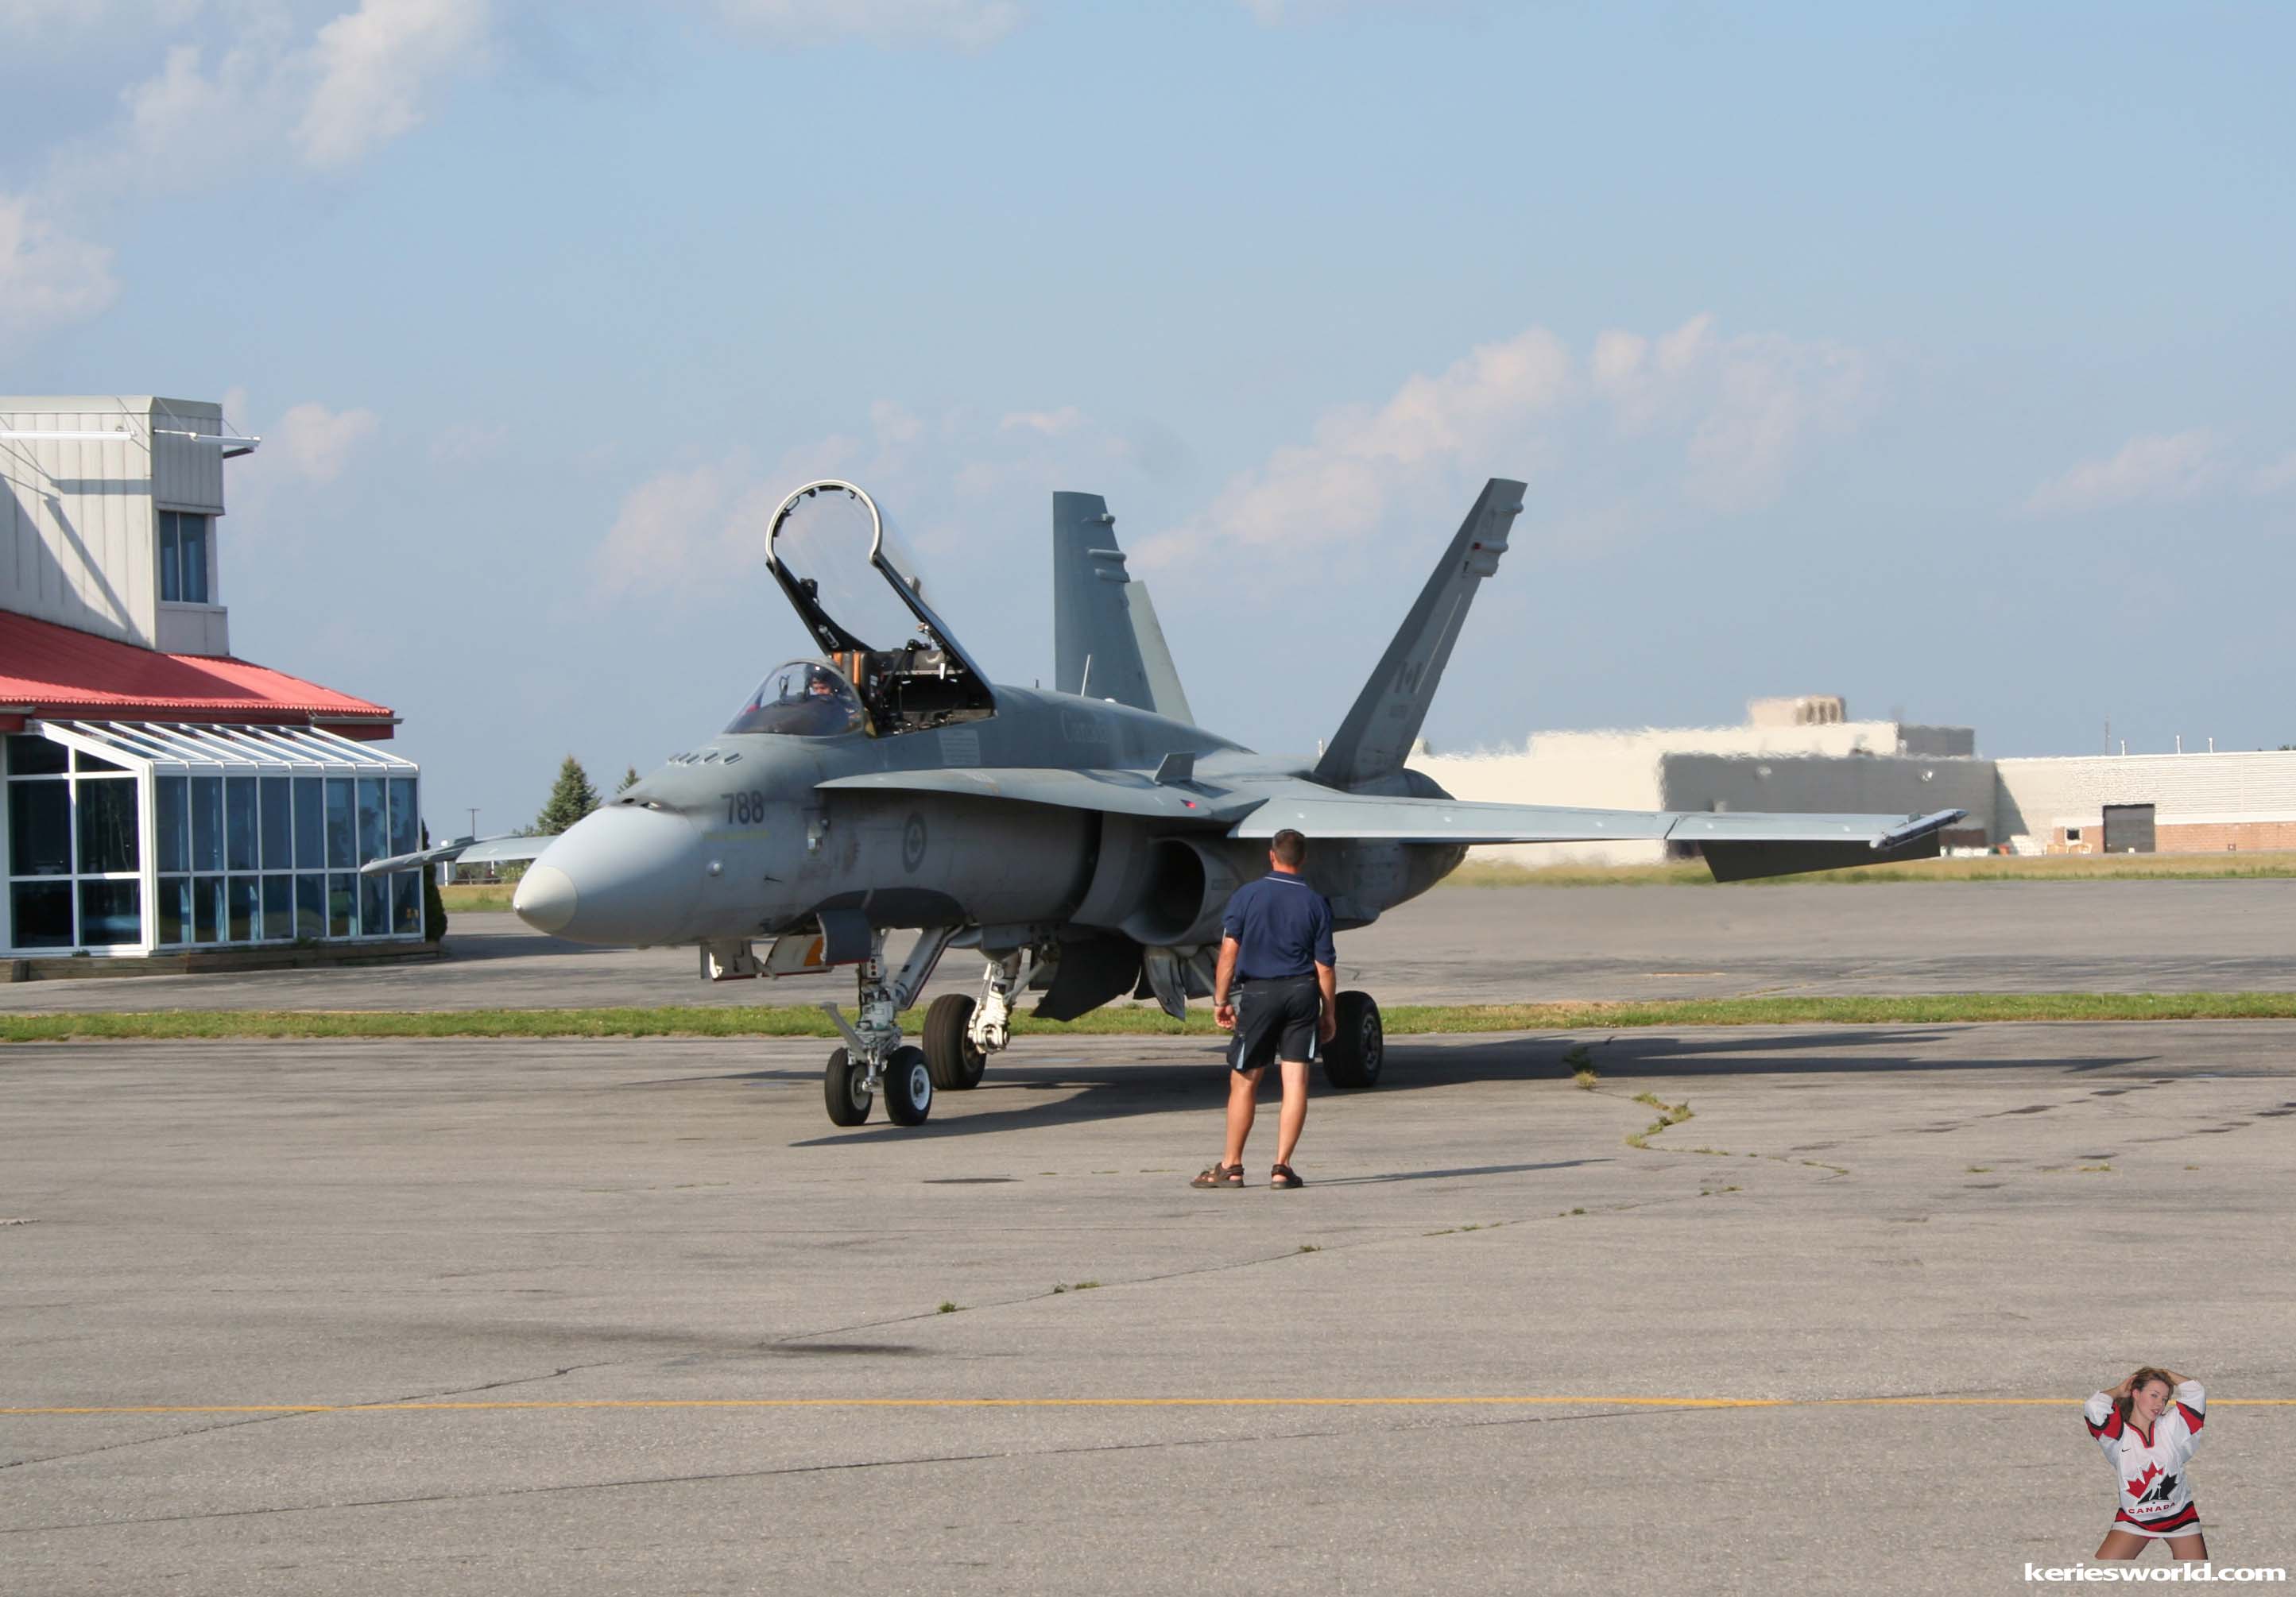 CF18 doing his last minute checks before heading out at the Macdonald Cartier Airport in Ottawa